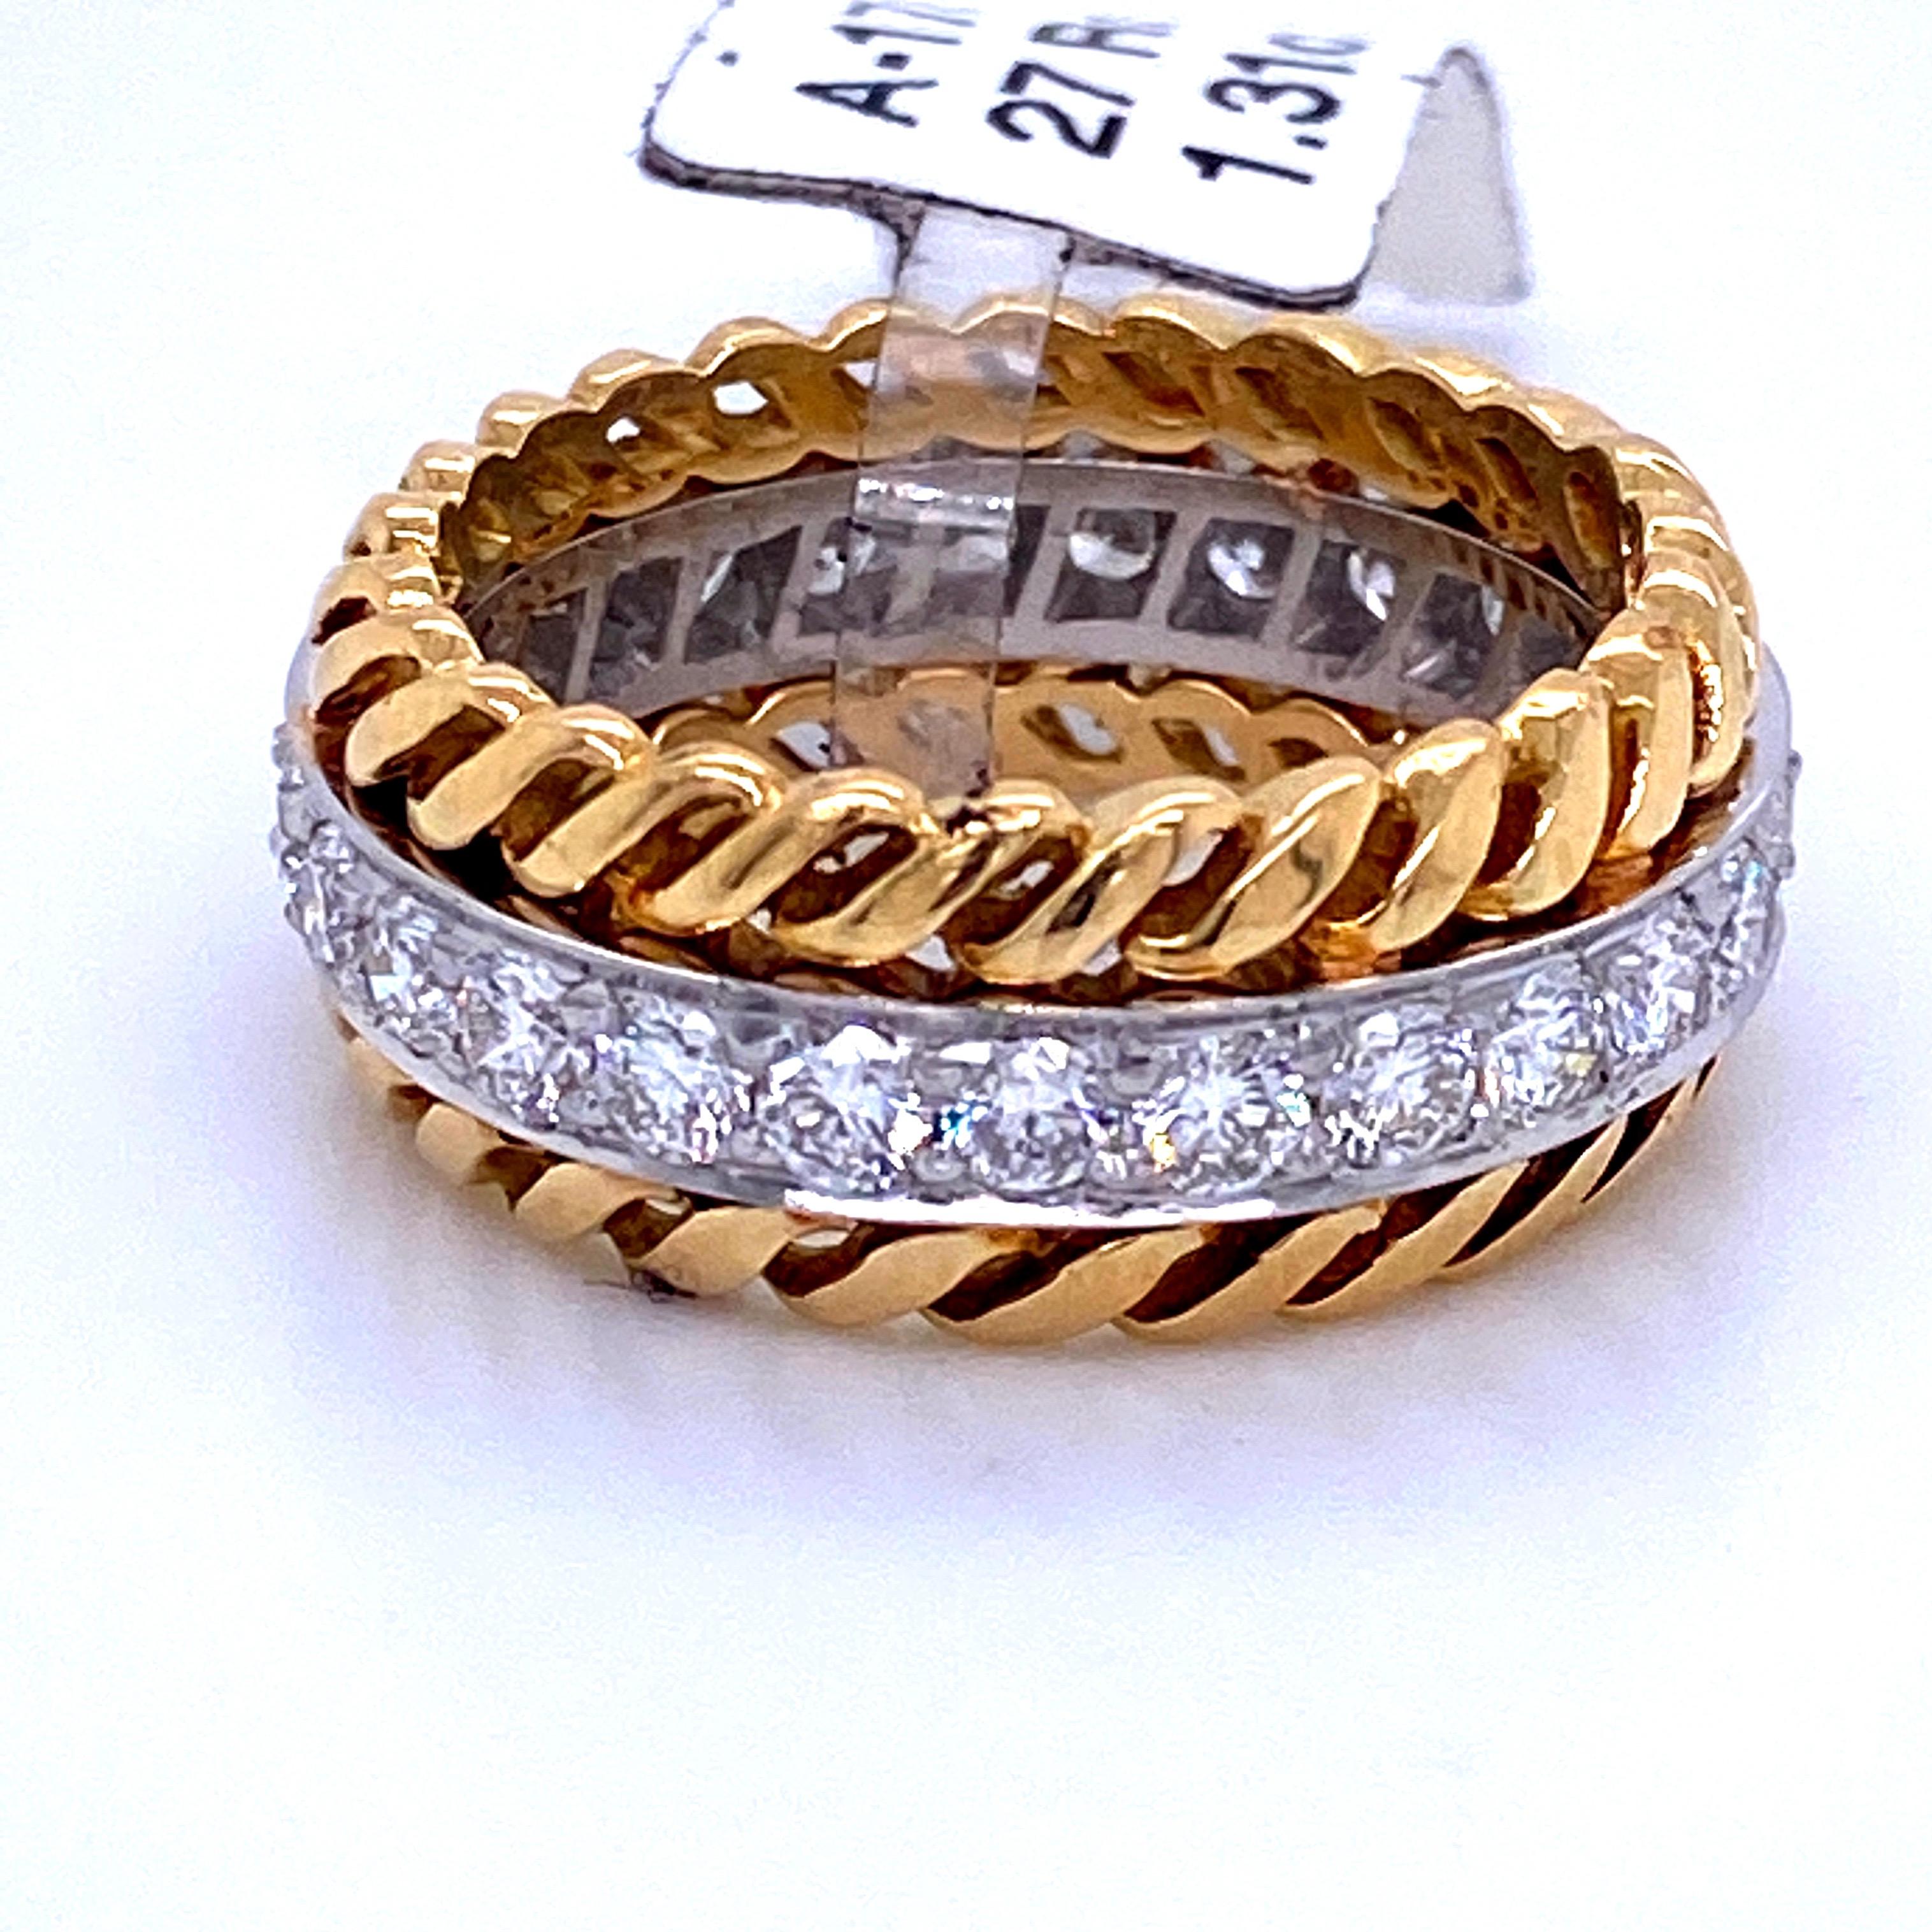 18K Yellow gold cable motif wedding band featuring one row of 27 round brilliants weighing 1.31 carats.
Color G
Clarity SI

Size 5 3/4